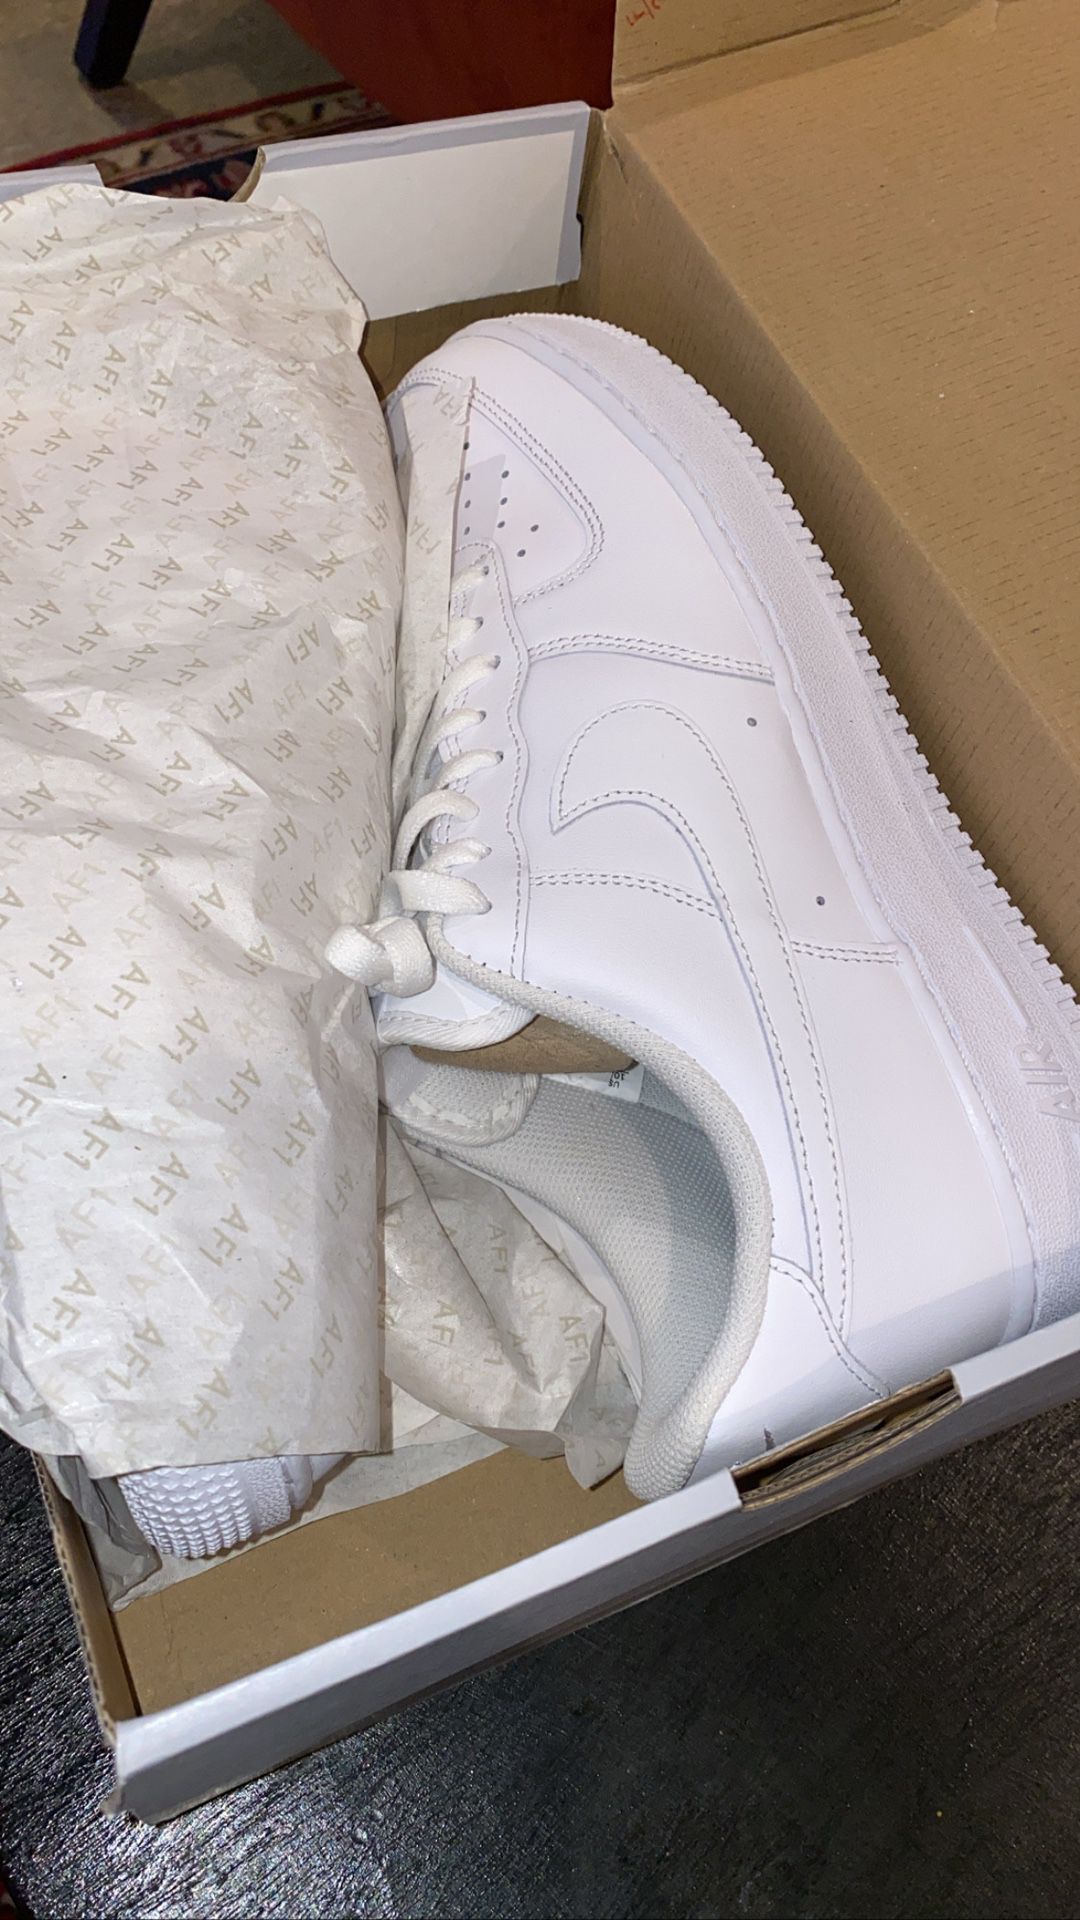 Brand new air force 1s Size 10.5